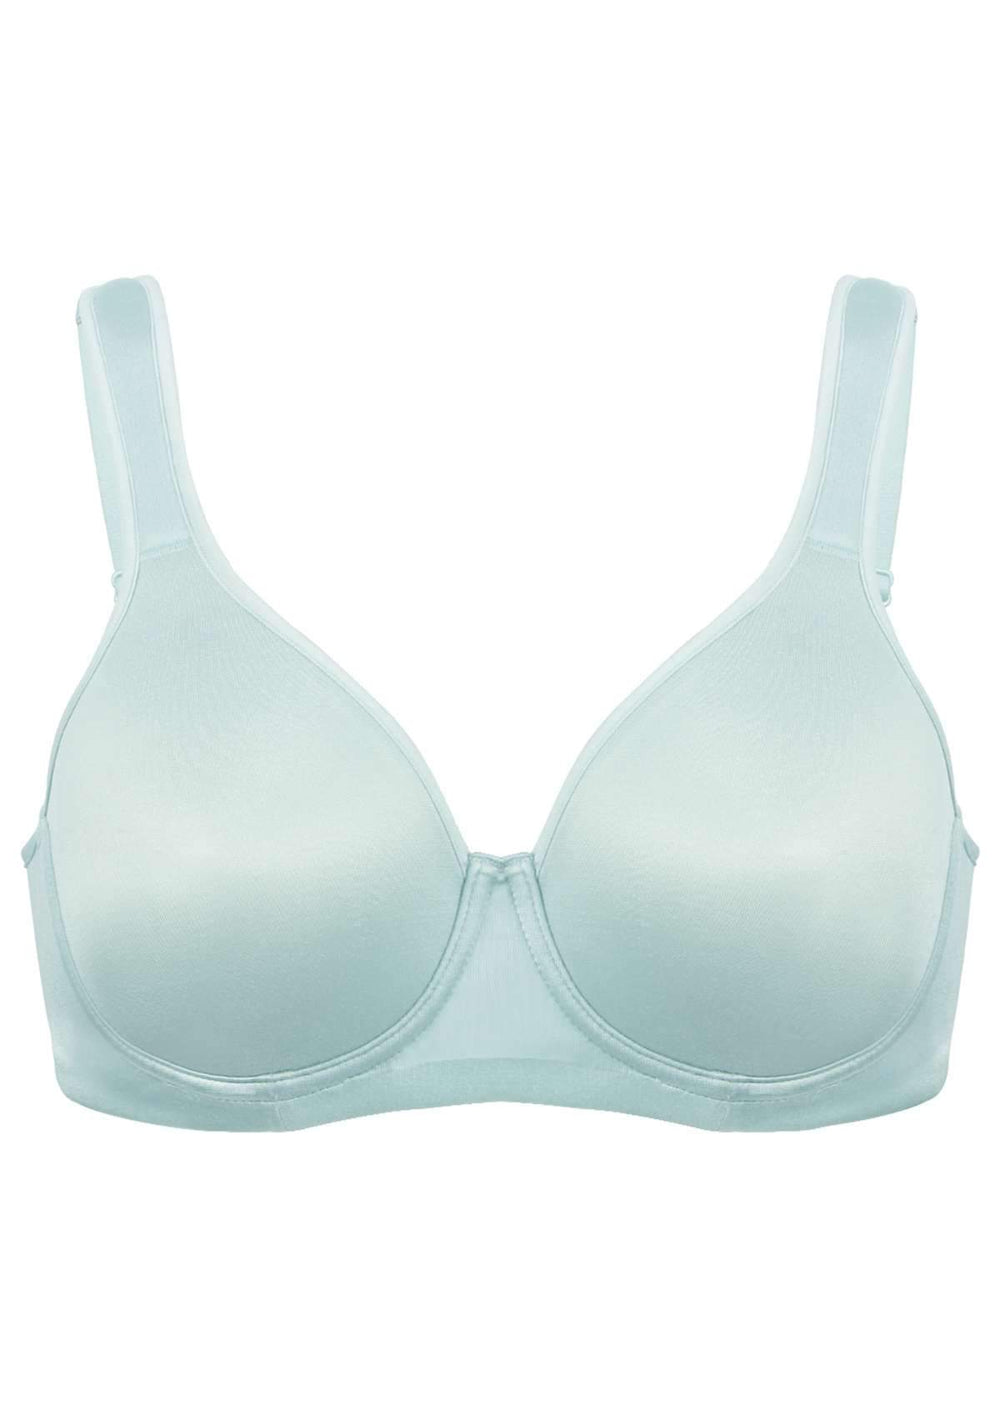 Hsia-Bras the best bras ever!! #foryou #hsiabra #hsiabras